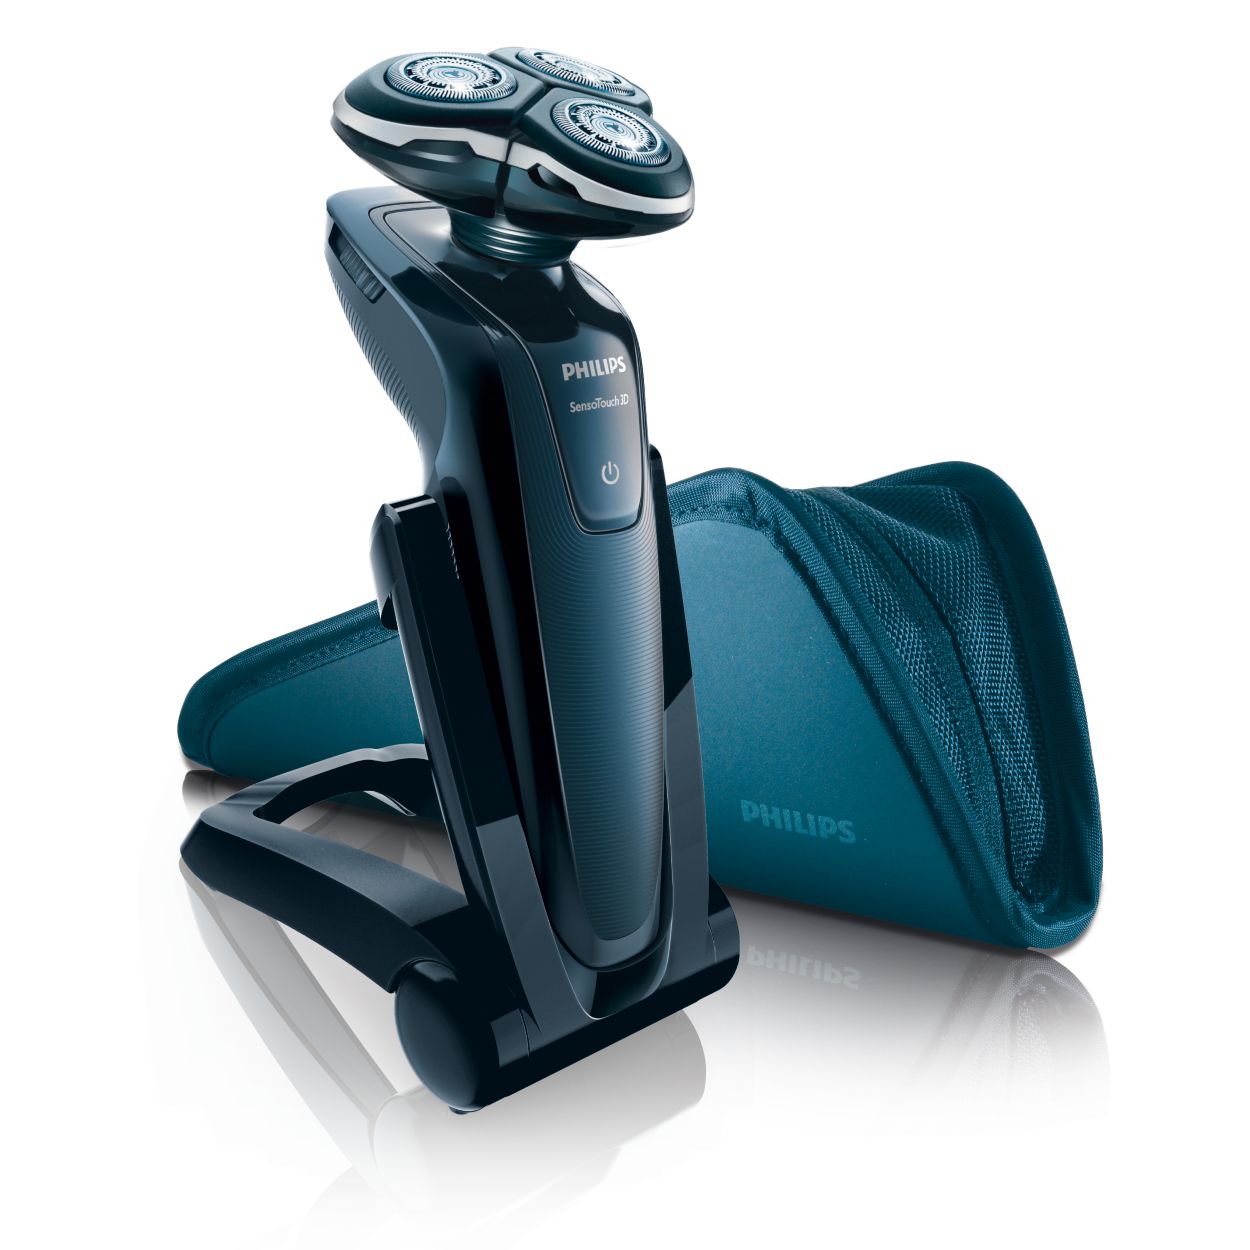 Shaver series 9000 SensoTouch Wet & dry electric shaver RQ1250/17 